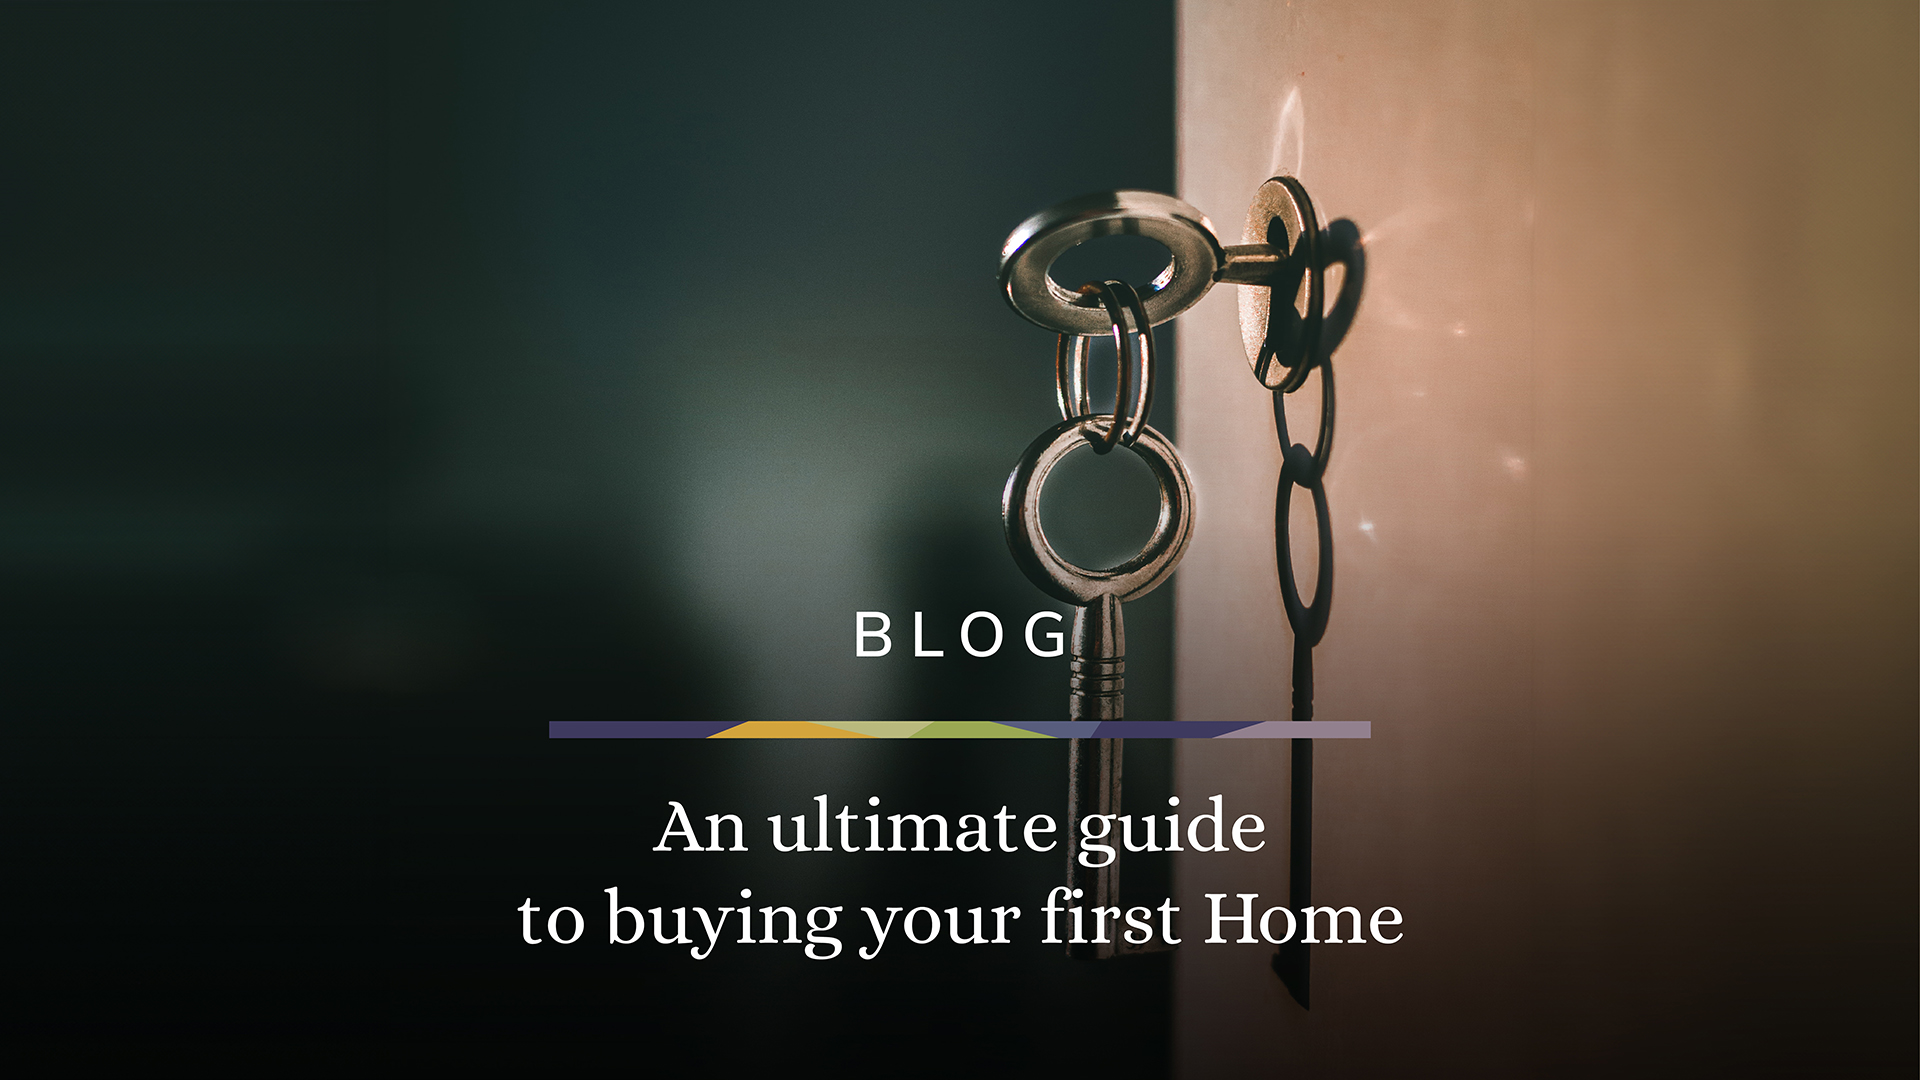 Blog An ultimate guide to buying your first home 02